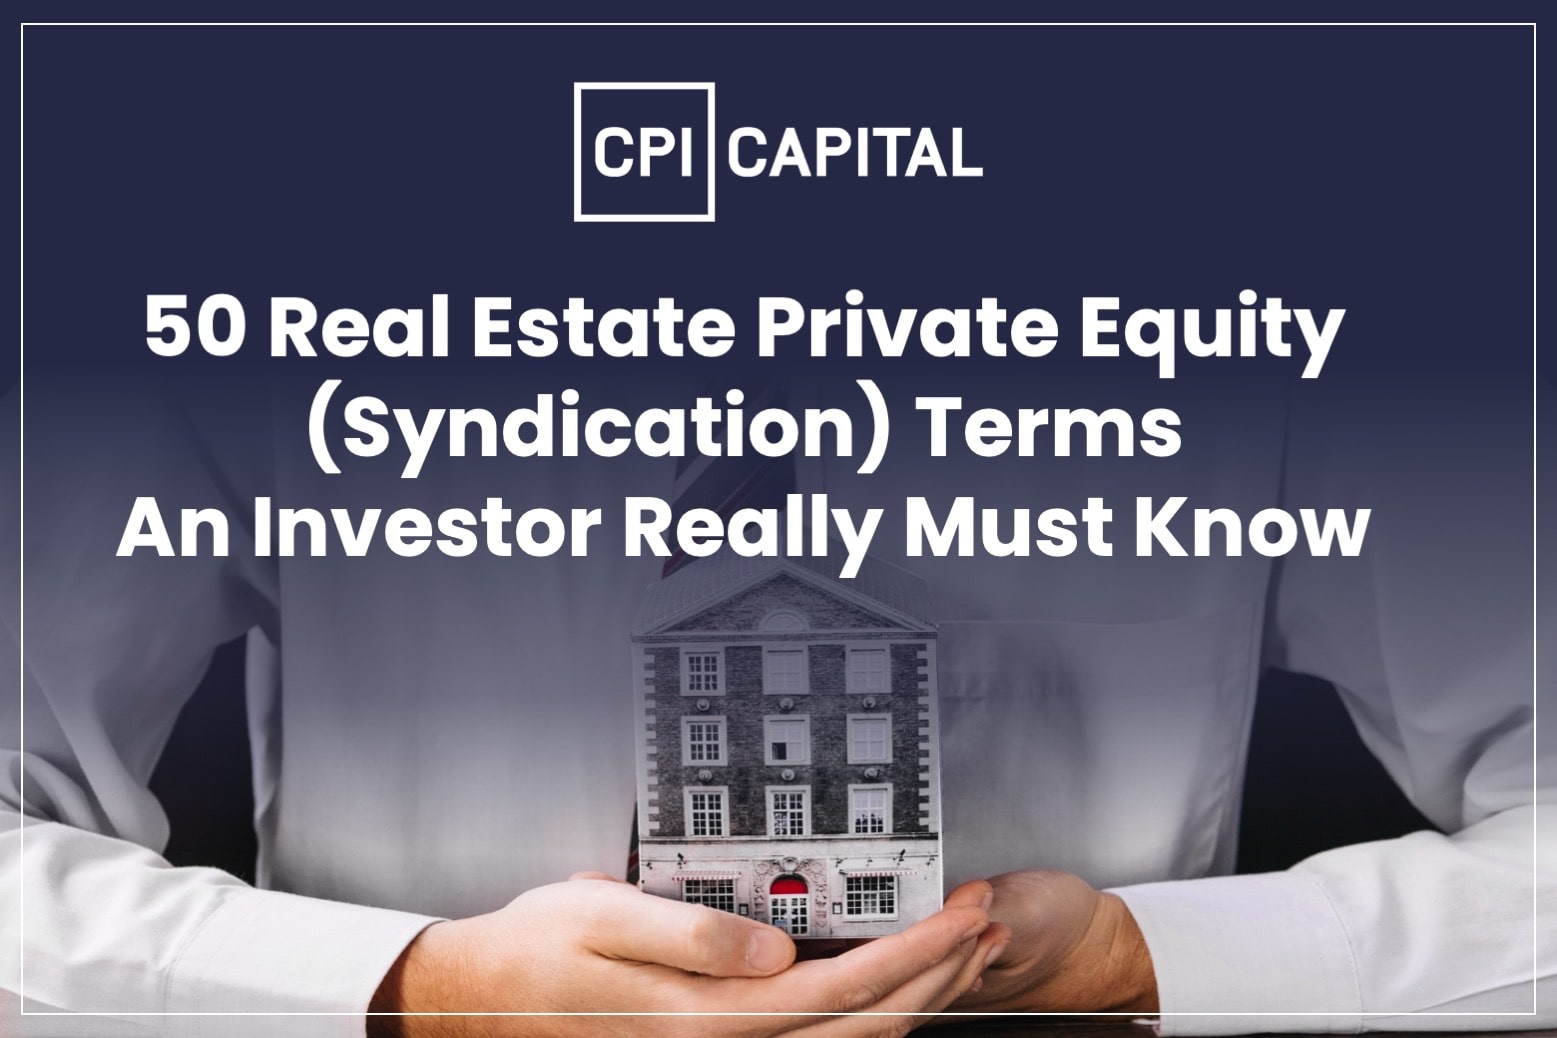 CPI capital_50 Real Estate Private Equity (Syndication) Terms An Investor Really Must Know